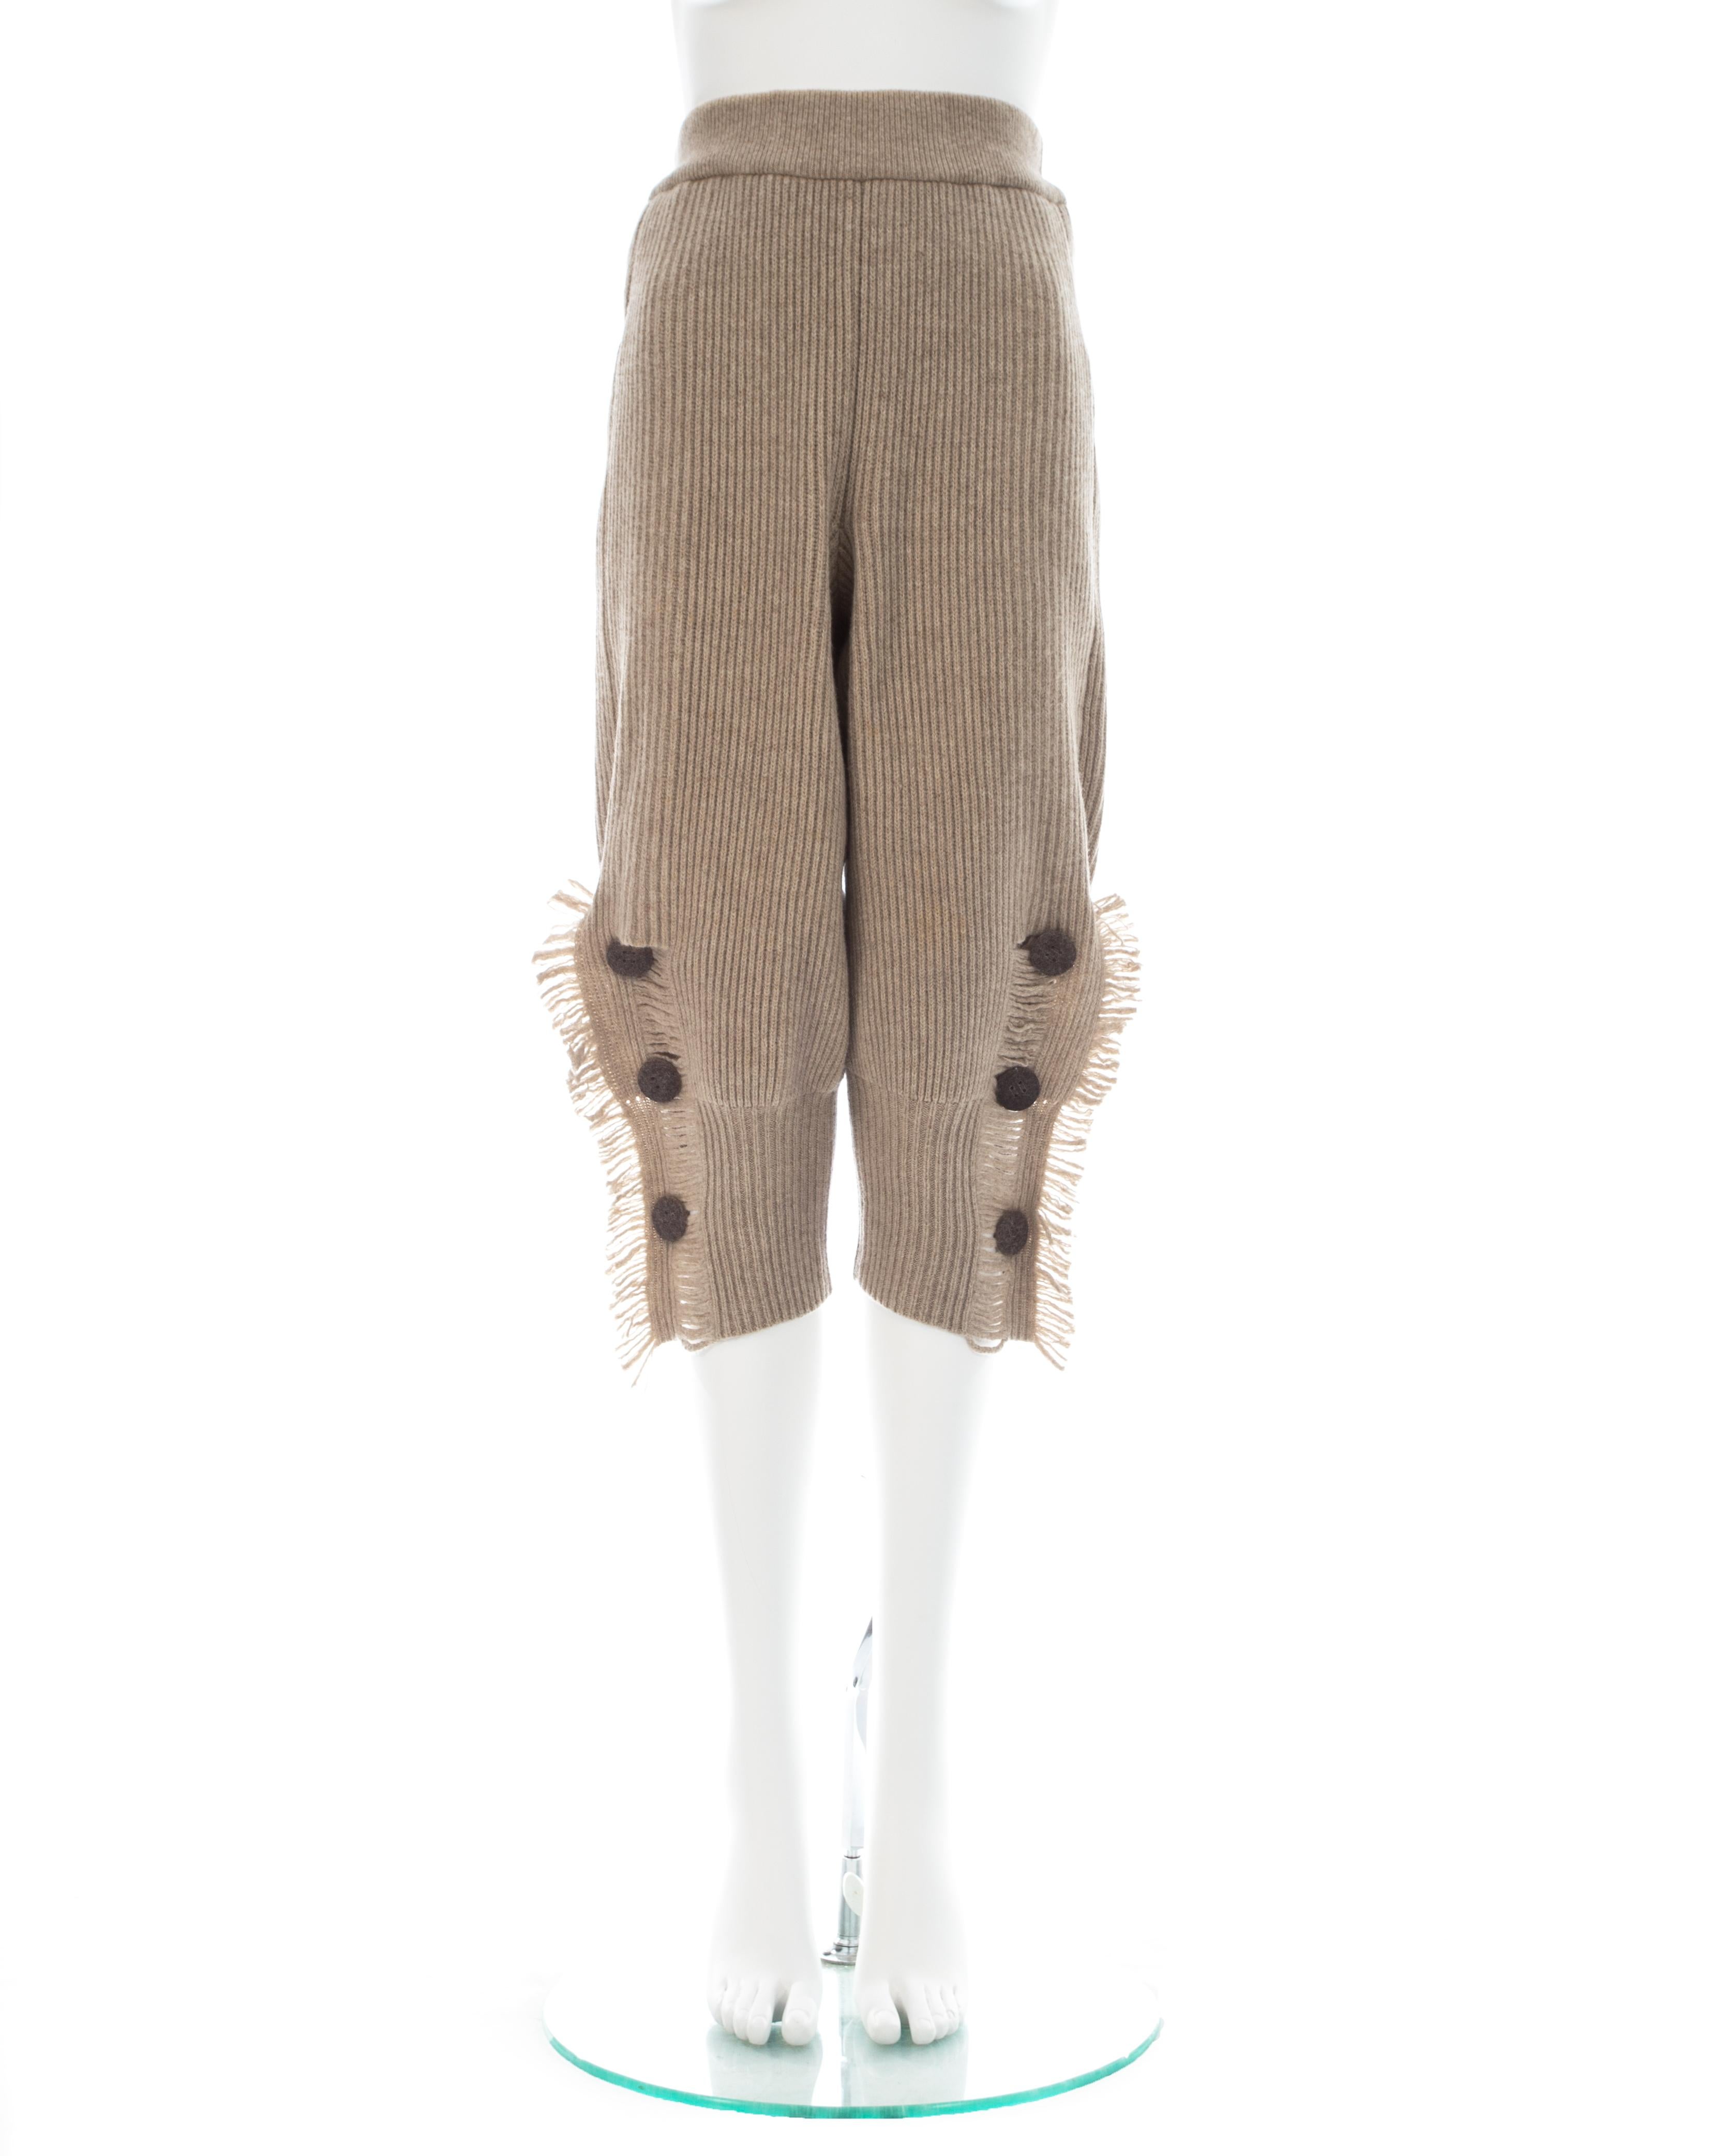 Issey Miyake; Taupe rib knit wool shorts with elastic waistband and fringed side vents

Fall-Winter 1988